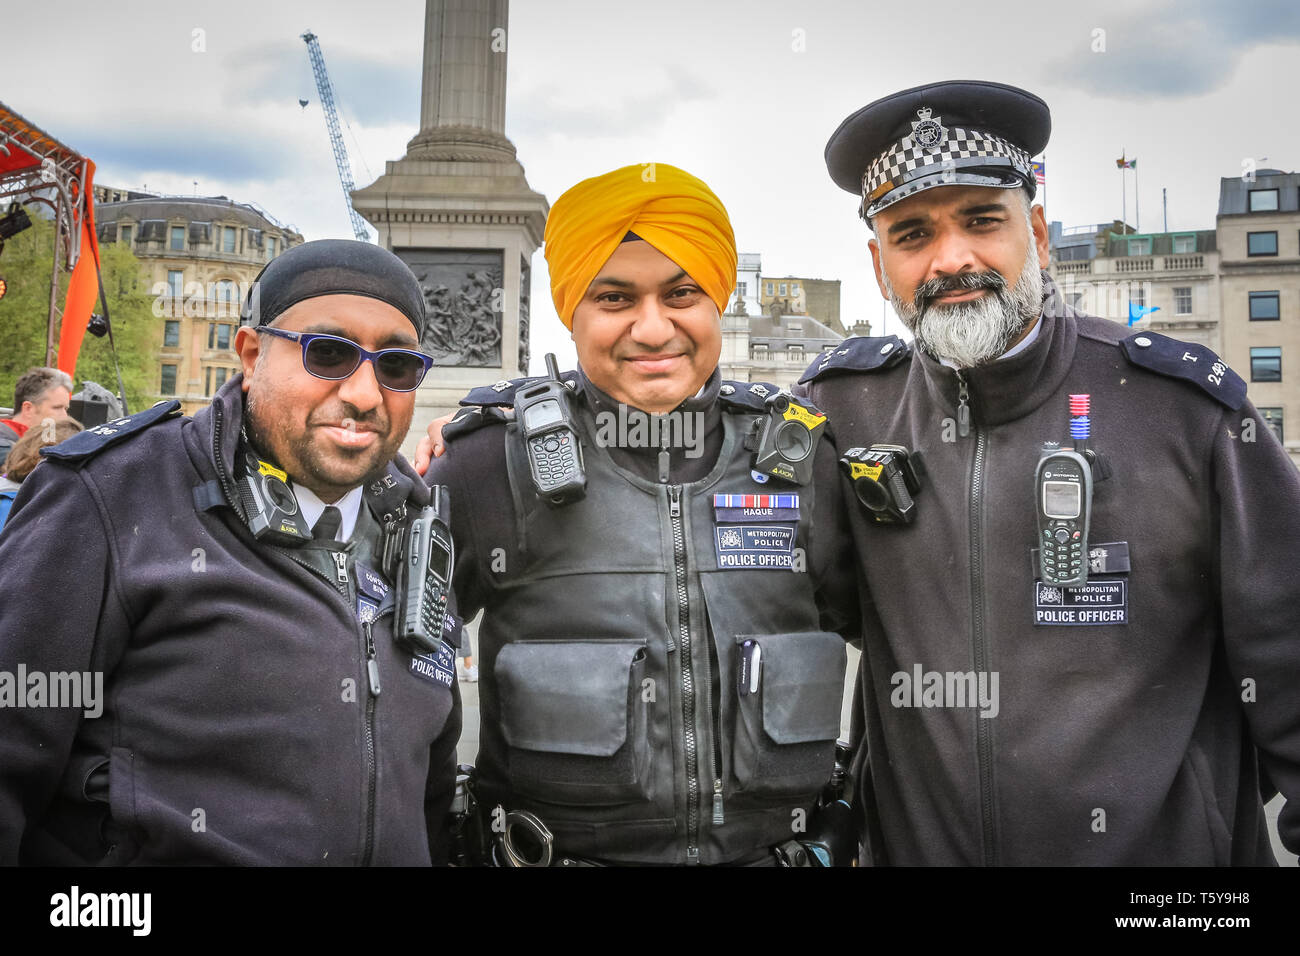 Trafalgar Square, London, UK, 27th April 2019. Sikh police officers and support officers join their colleagues in guarding the event. Vaisakhi Festival, a celebration of Sikh culture and heritage is once again brought back to Trafalgar Square. Highlights include colourful stage performances of kirtan and dharmic music, as well as food and cooking demonstrations. Credit: Imageplotter/Alamy Live News Stock Photo